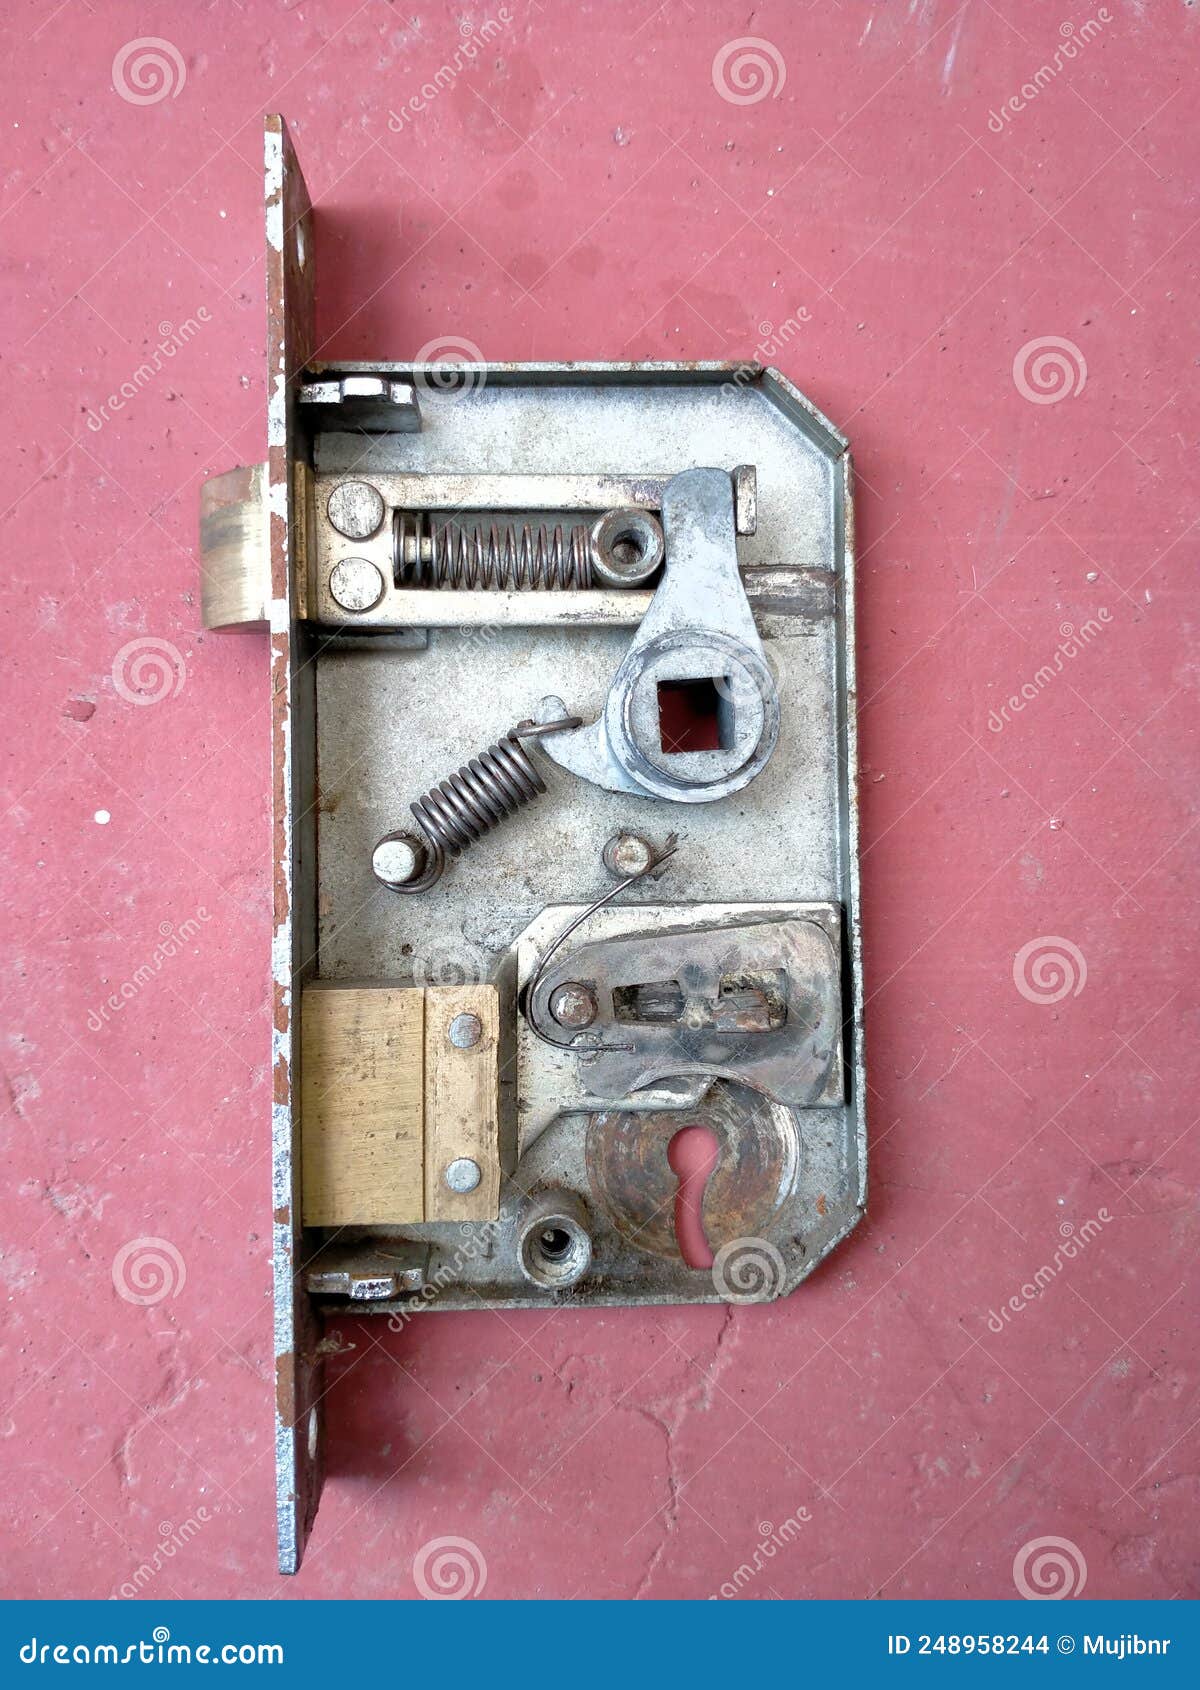 HOUSE :: ELEMENTS OF A HOUSE :: LOCK :: MORTISE LOCK image